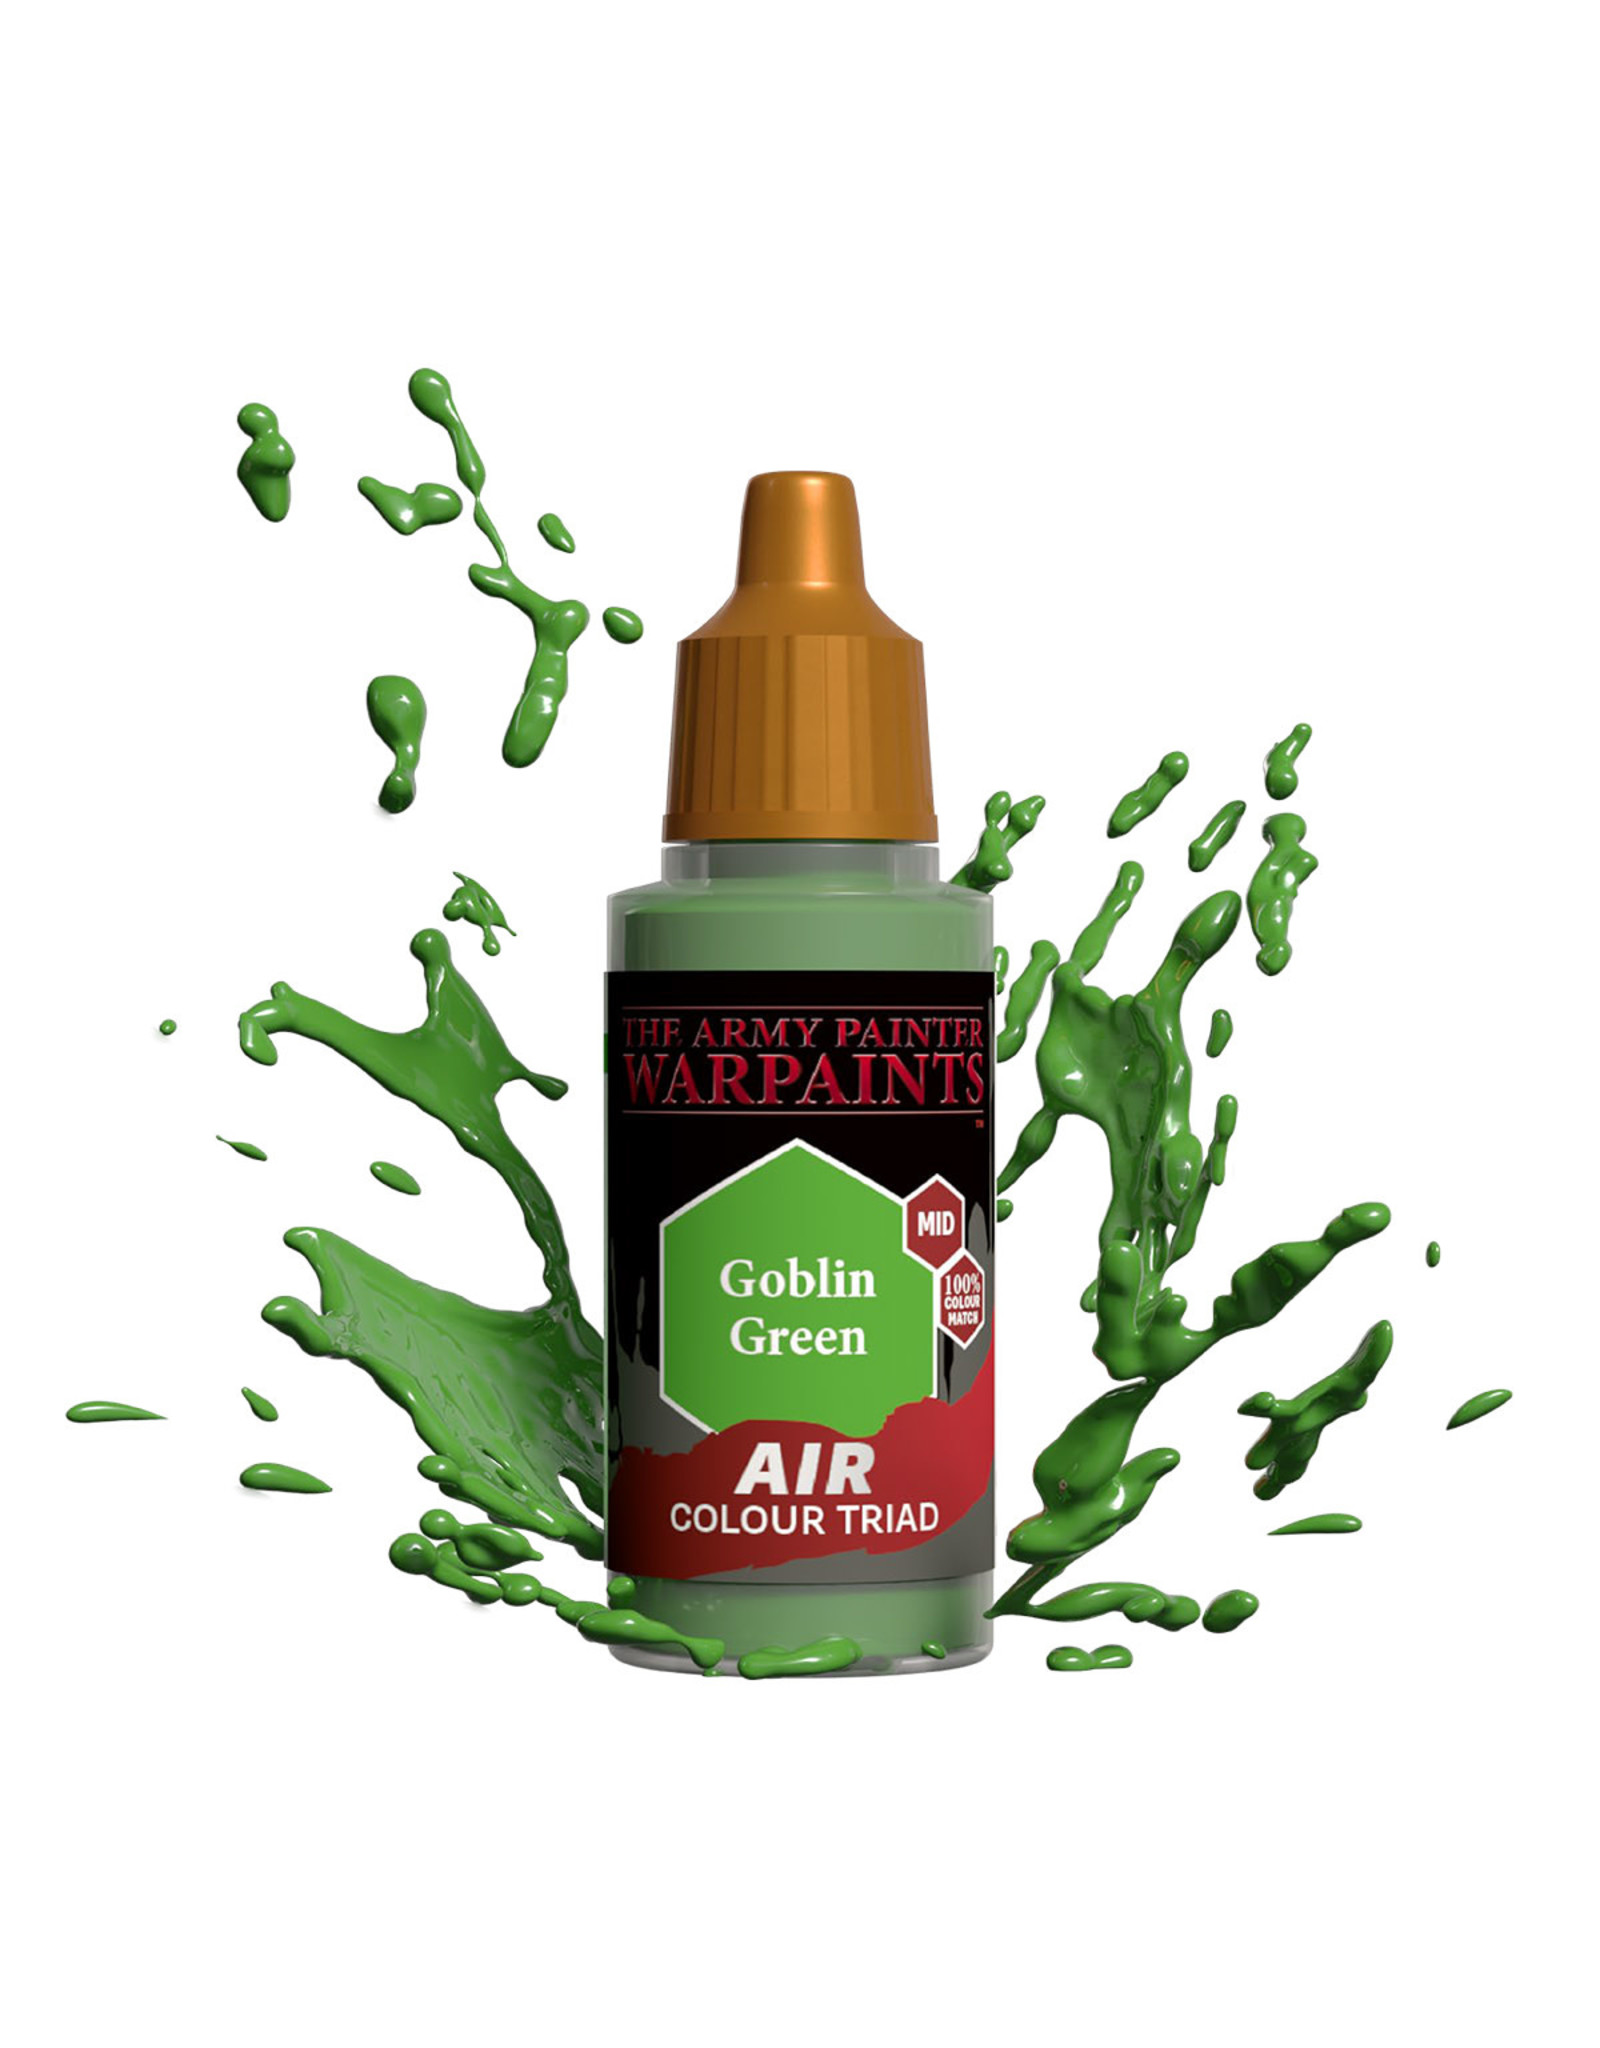 The Army Painter The Army Painter Warpaints Air: Goblin Green